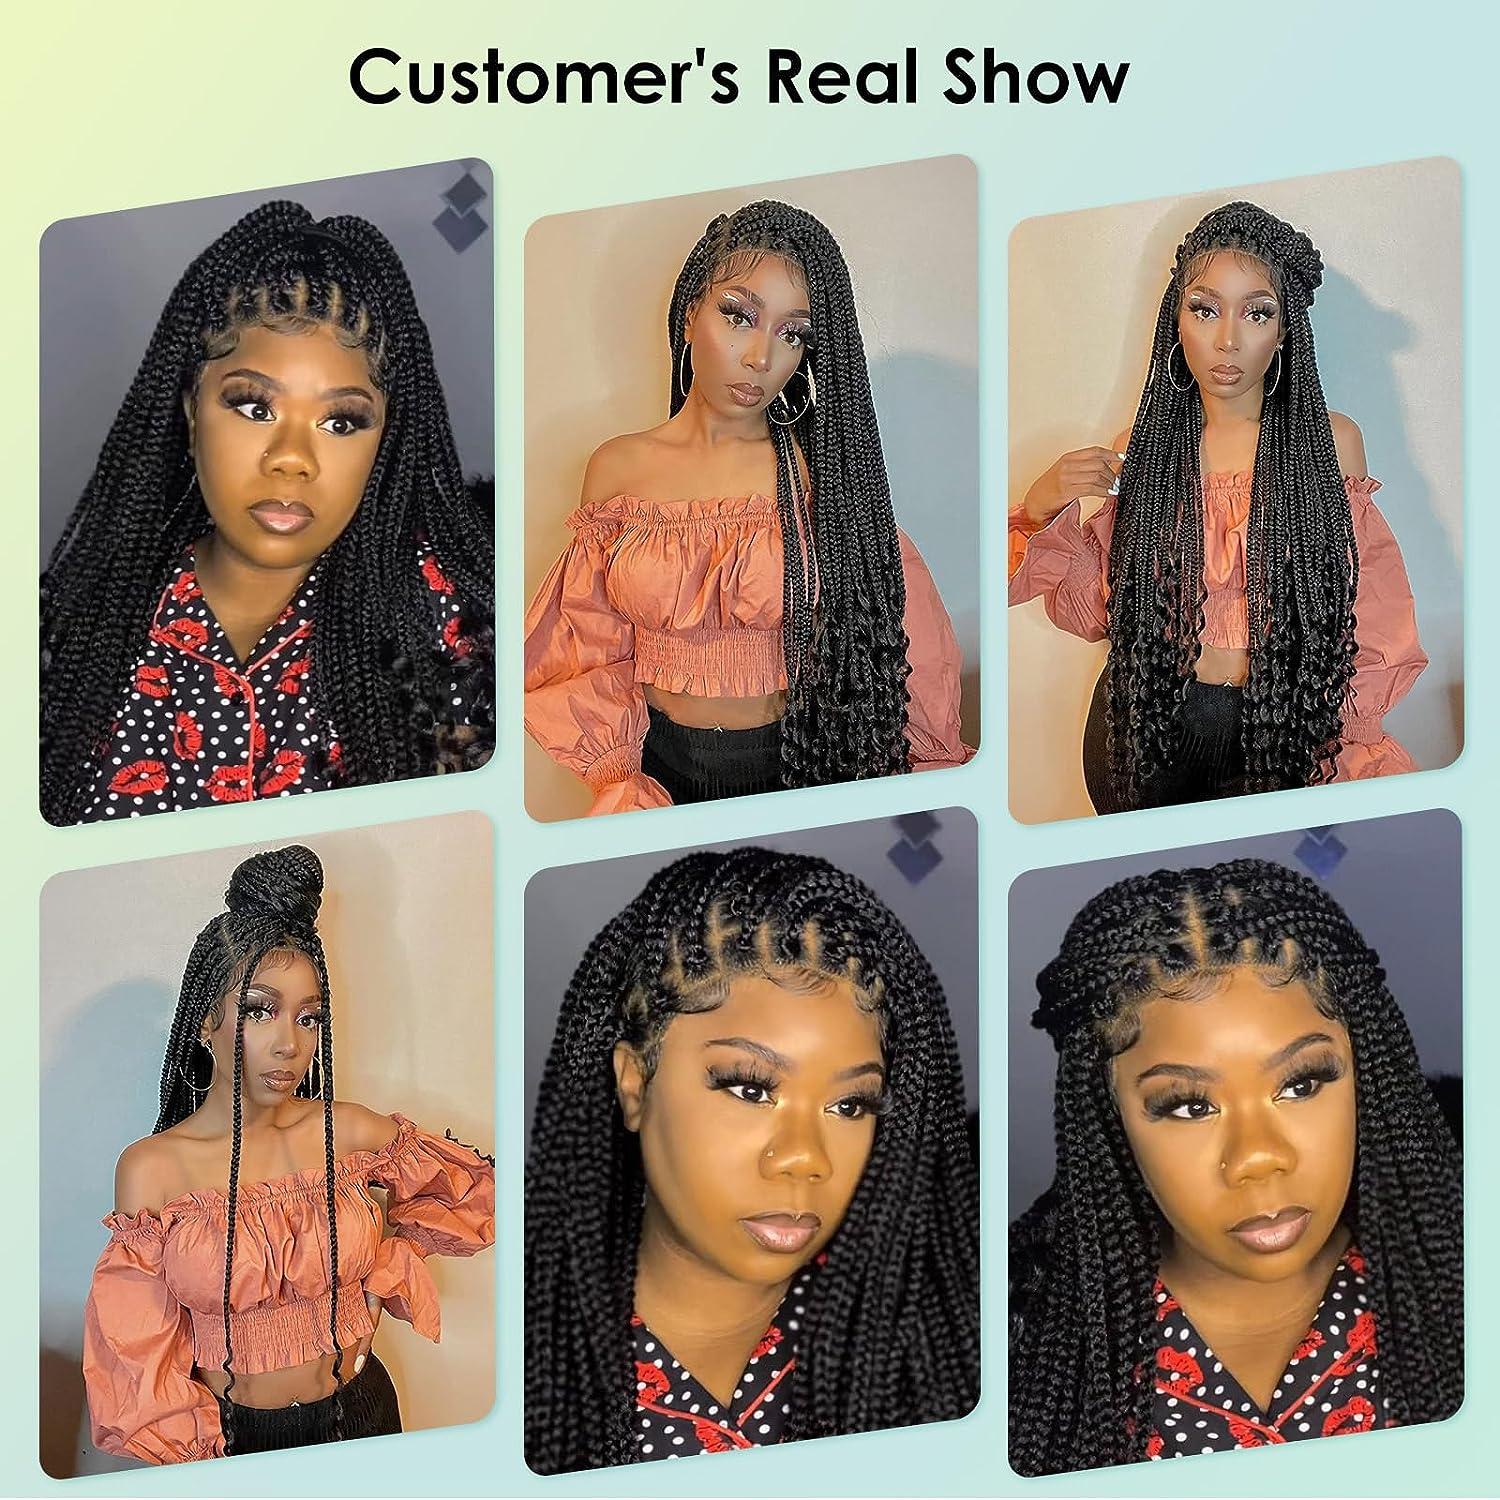 Fecihor 36 Full Double Lace Braided Wigs with Boho Curly Ends Knotless  Cornrow Box Braided Wig for Black Women Synthetic Lace Front Black Braids  Wigs with Baby Hair